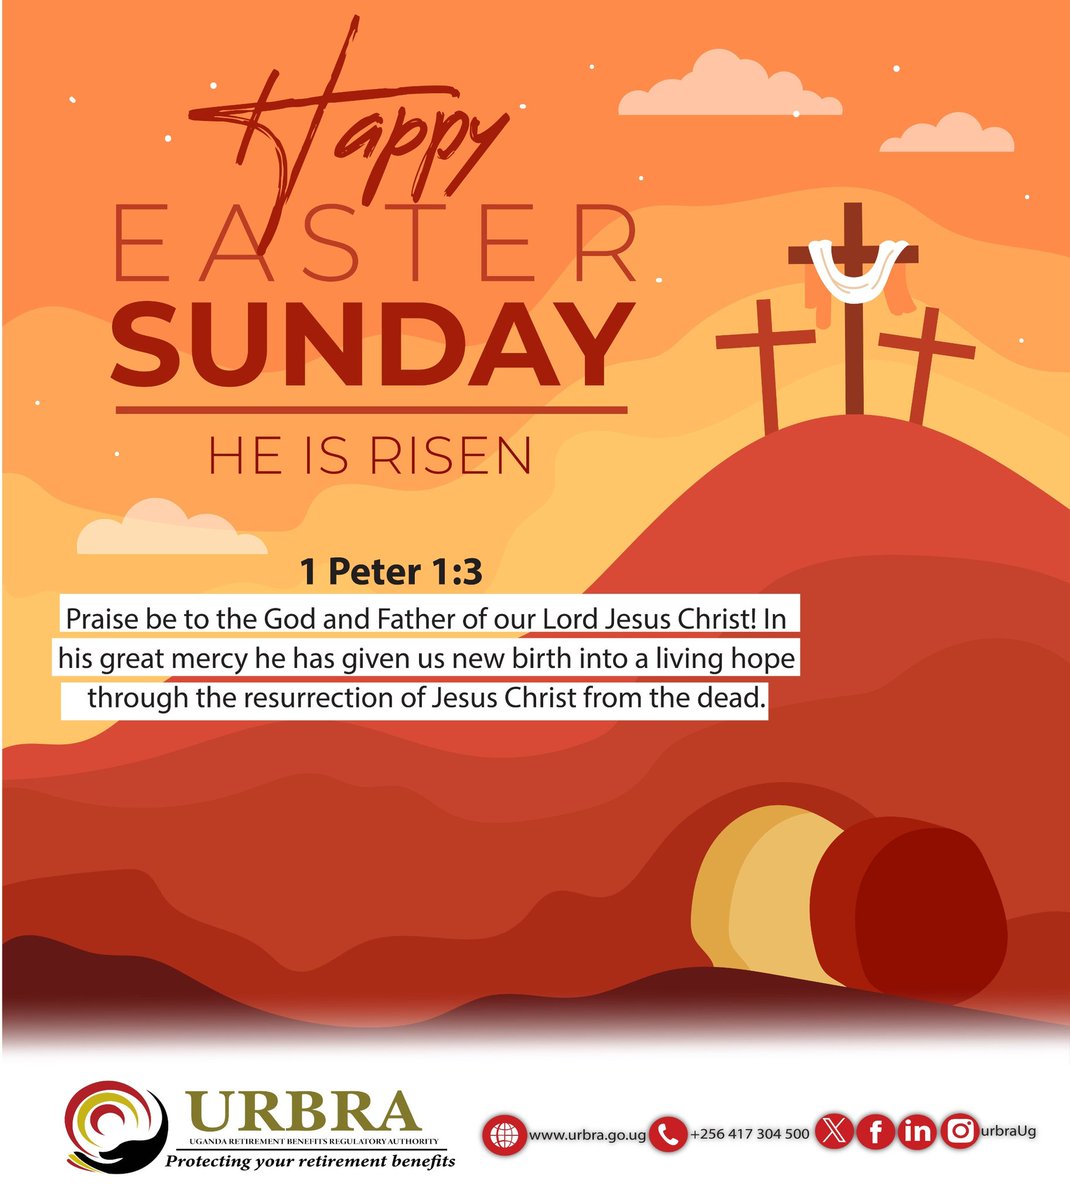 Joining you in gratitude for Christ’s sacrifice and the joyful renewal it brings to all God’s children this Easter season. #HappyEaster from all of us @urbraUg